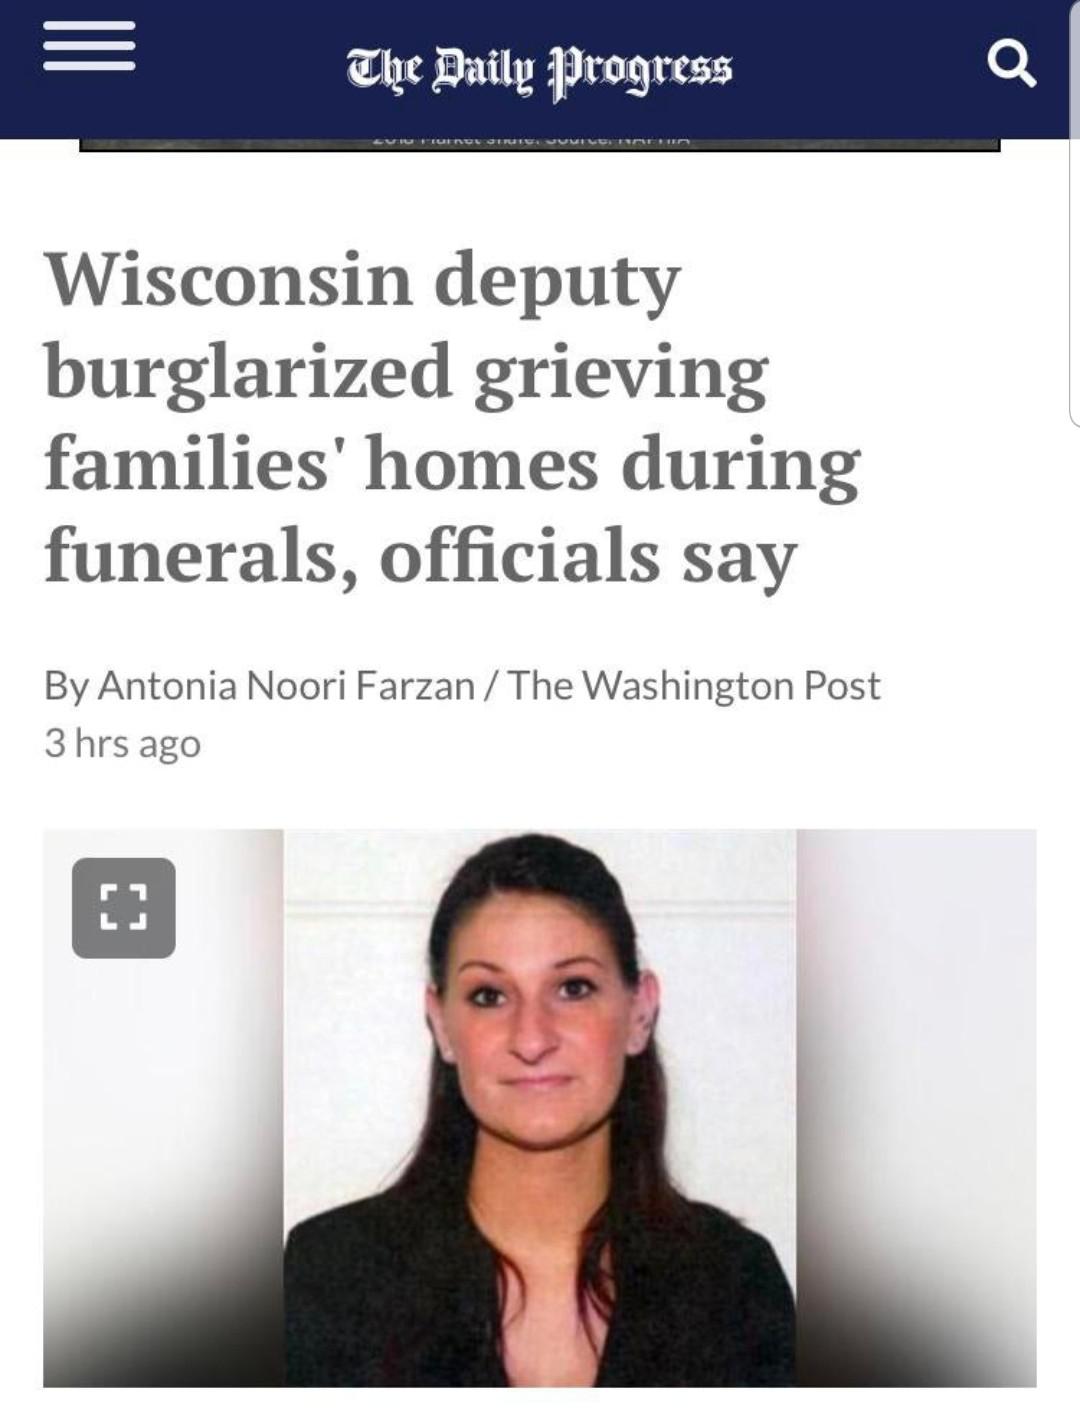 media - The Daily Progress Rogerie wwur Ernes Wisconsin deputy burglarized grieving families' homes during funerals, officials say By Antonia Noori FarzanThe Washington Post 3 hrs ago L